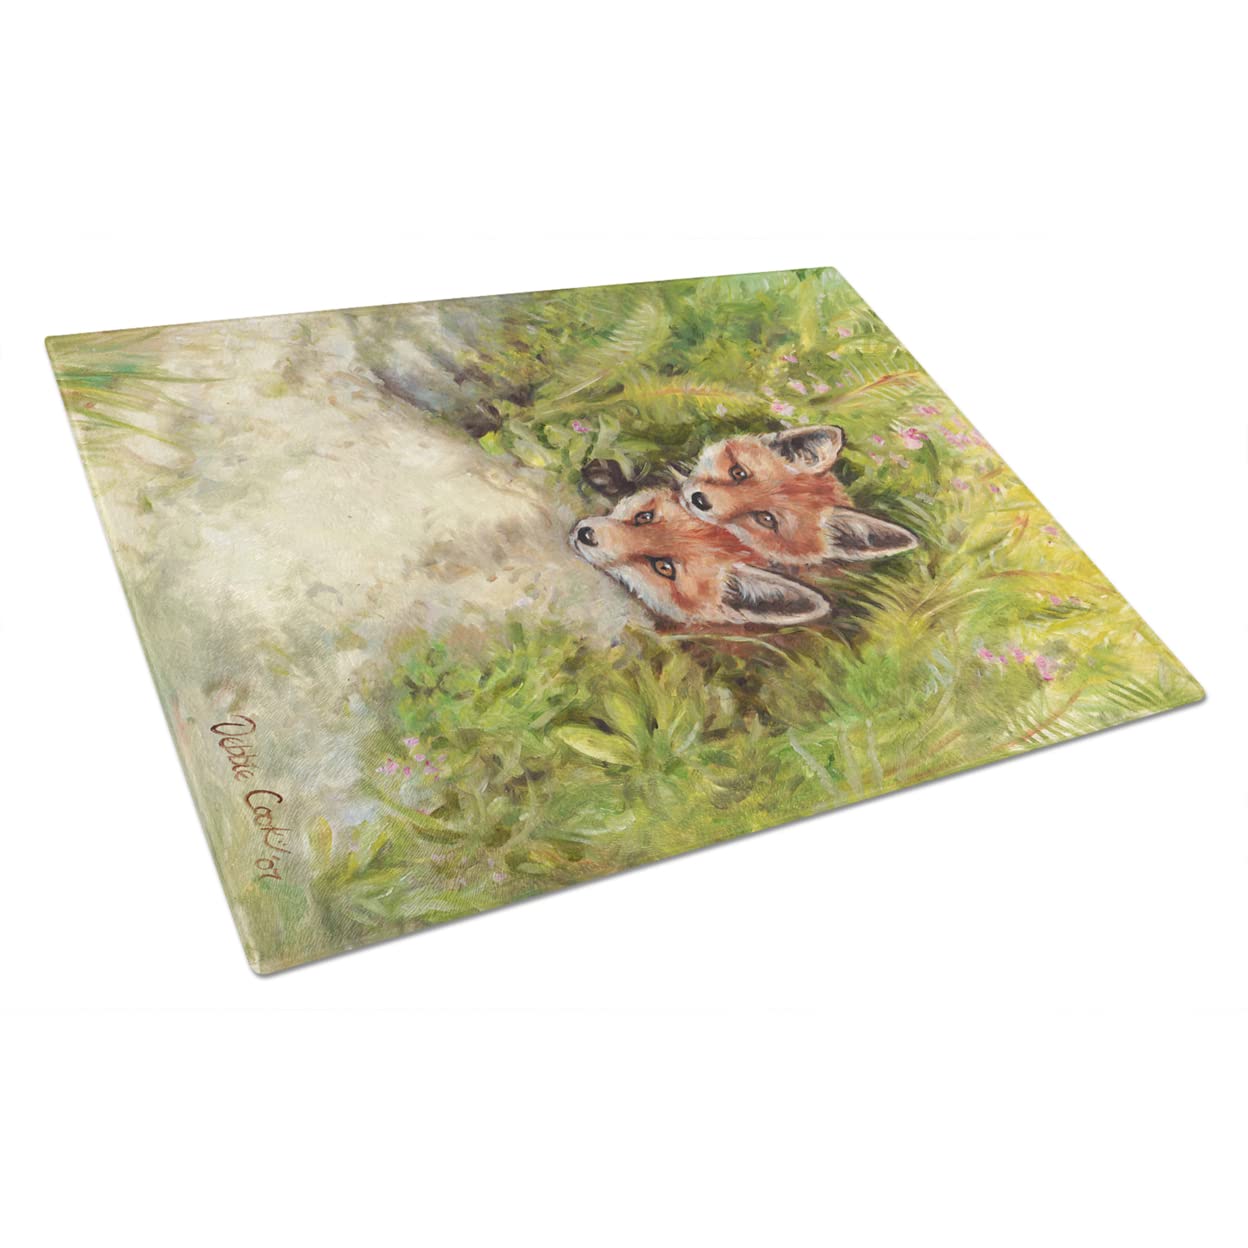 Caroline's Treasures CDCO0324LCB Fox Cubs Peepers by Debbie Cook Glass Cutting Board Large Decorative Tempered Glass Kitchen Cutting and Serving Board Large Size Chopping Board